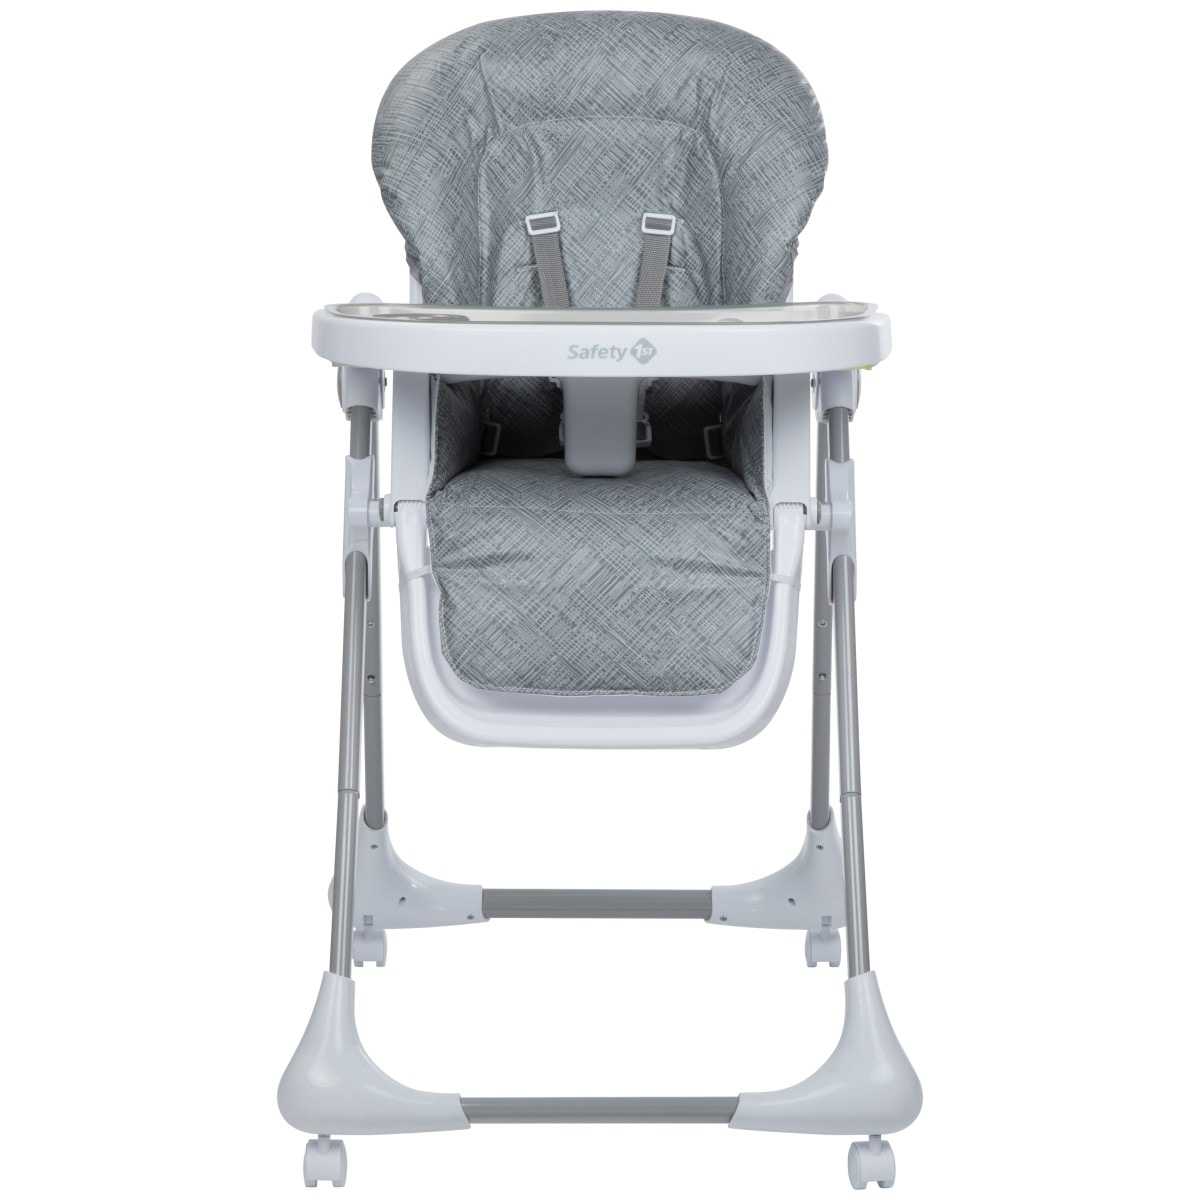 Safety 1st 3-in-1 and Go High Chair - Birchbark Gray | Child Safety Accessories | Plastic | Flame Retardant | Easy-to-Clean the Child Safety Accessories at Lowes.com